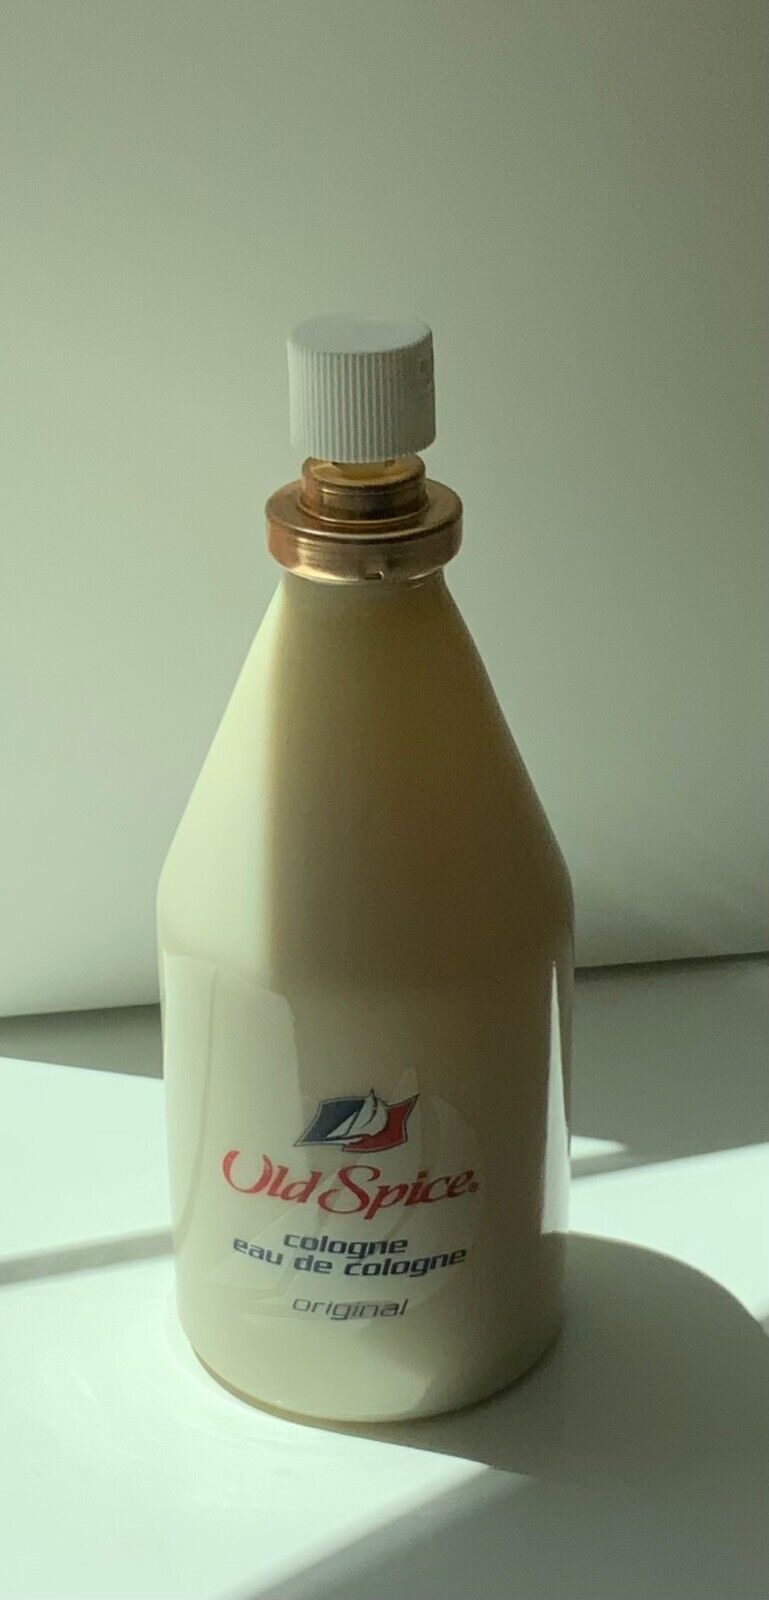 Vintage Old Spice cologne spray 2.5 oz/73 ml bottle early 1990s